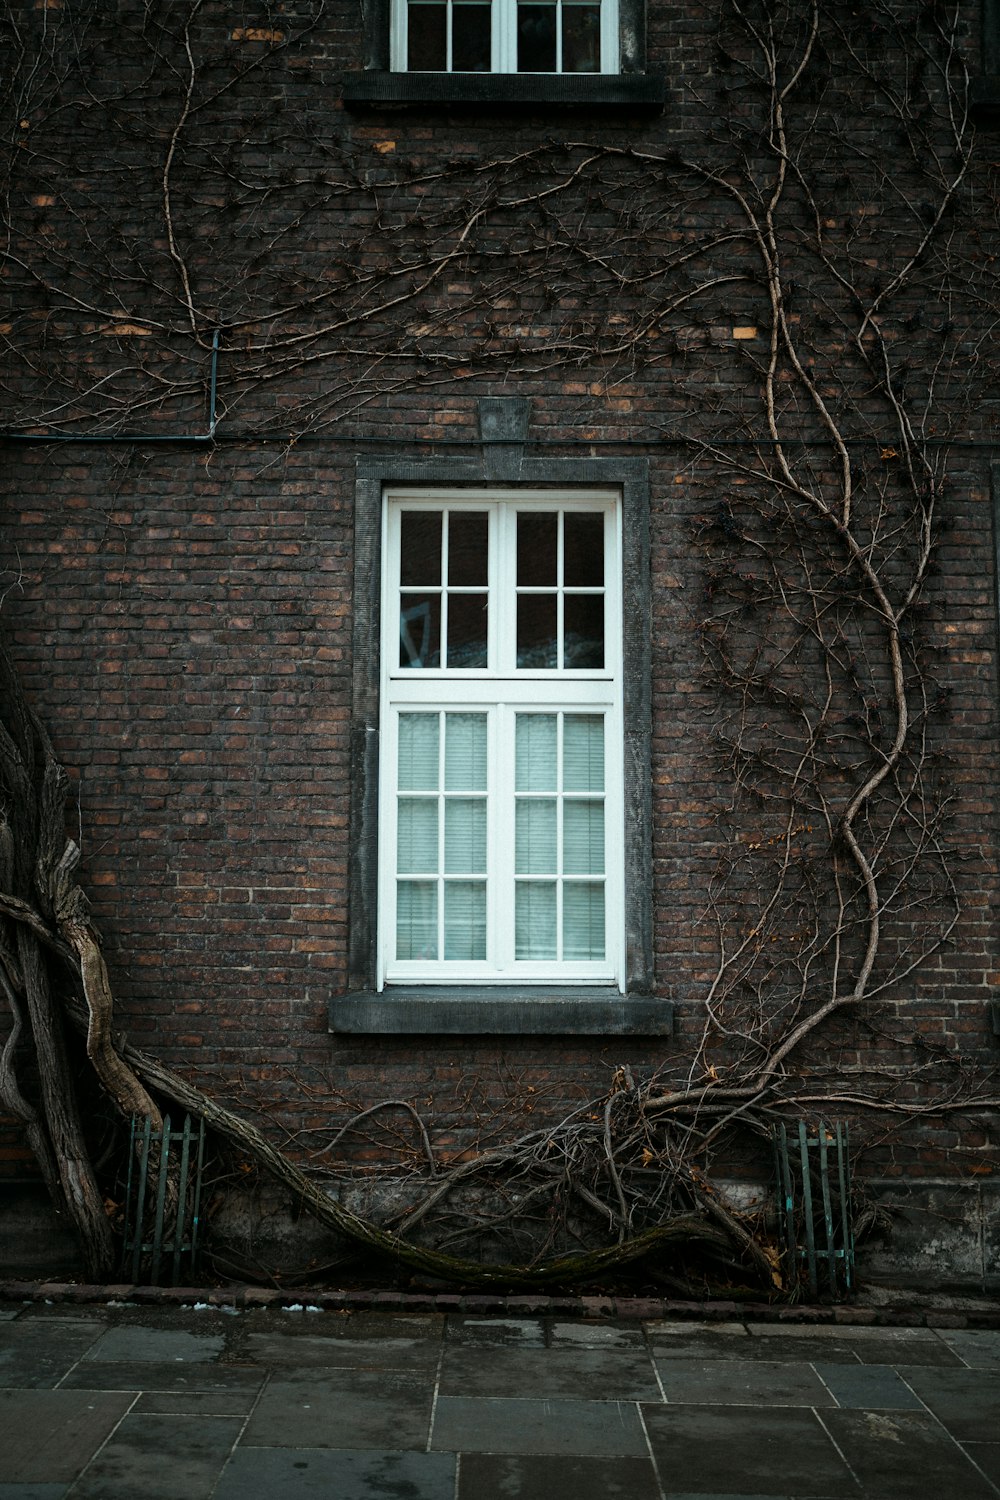 a brick building with a window and vines growing on it